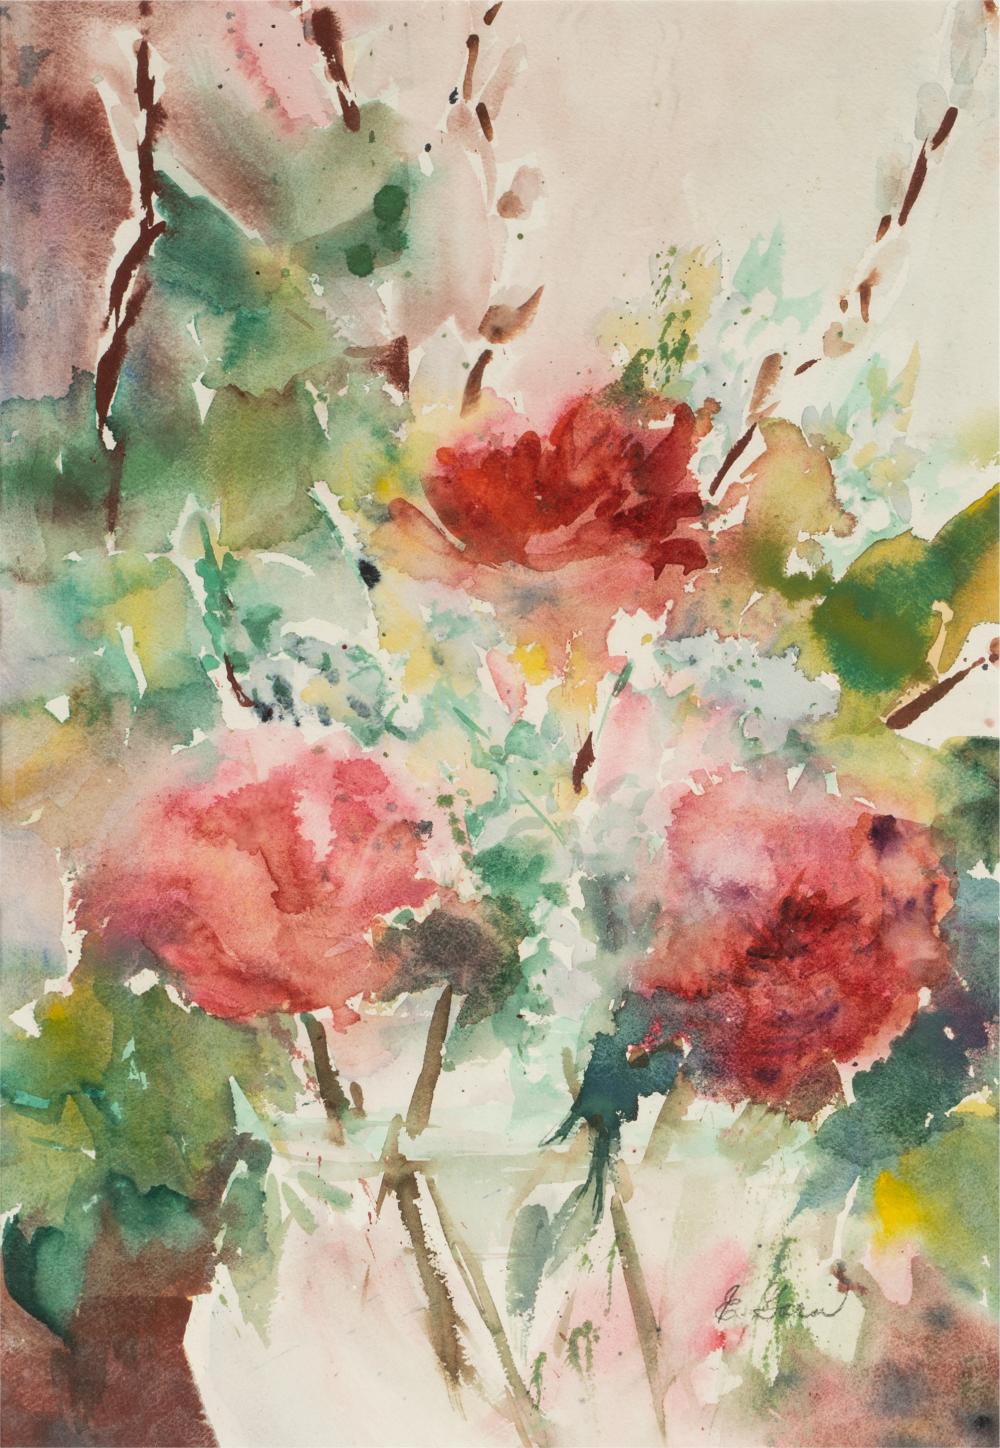 20TH CENTURY: ROSESwatercolor on